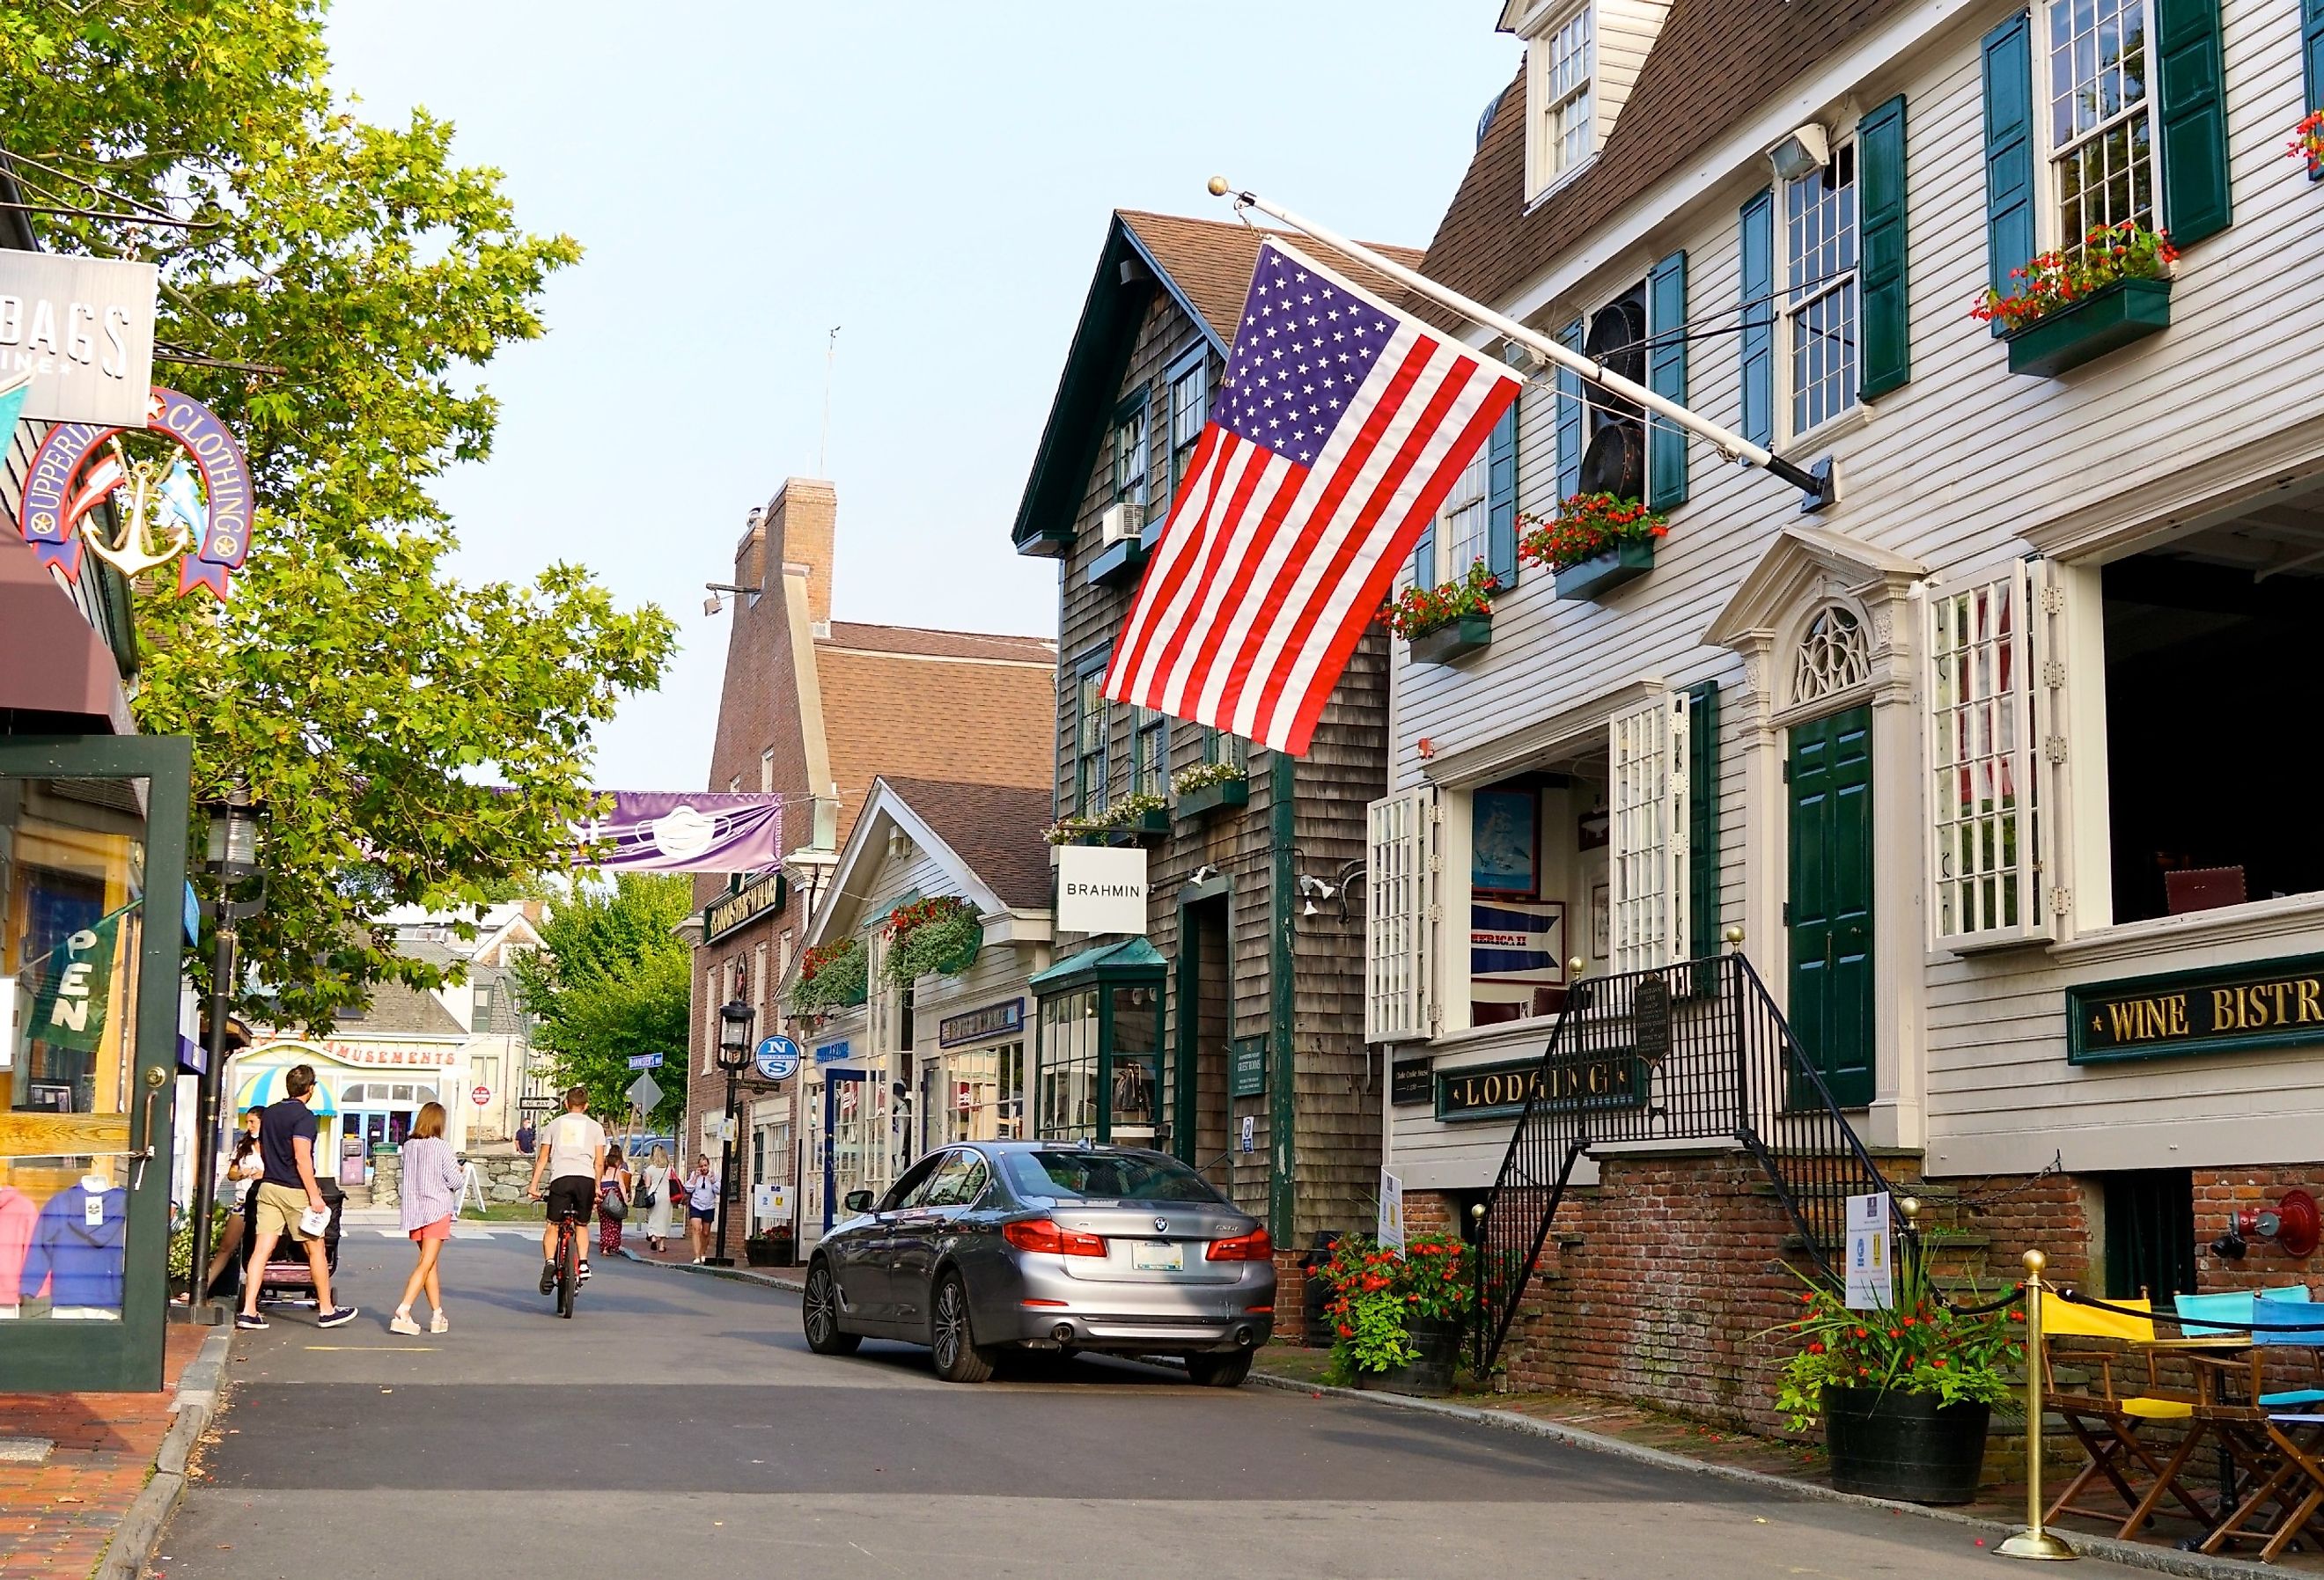 Rhode Island's famed Thames Street shopping district is home to many specialty shops, restaurants, hotels in Newport. Image credit George Wirt via Shutterstock